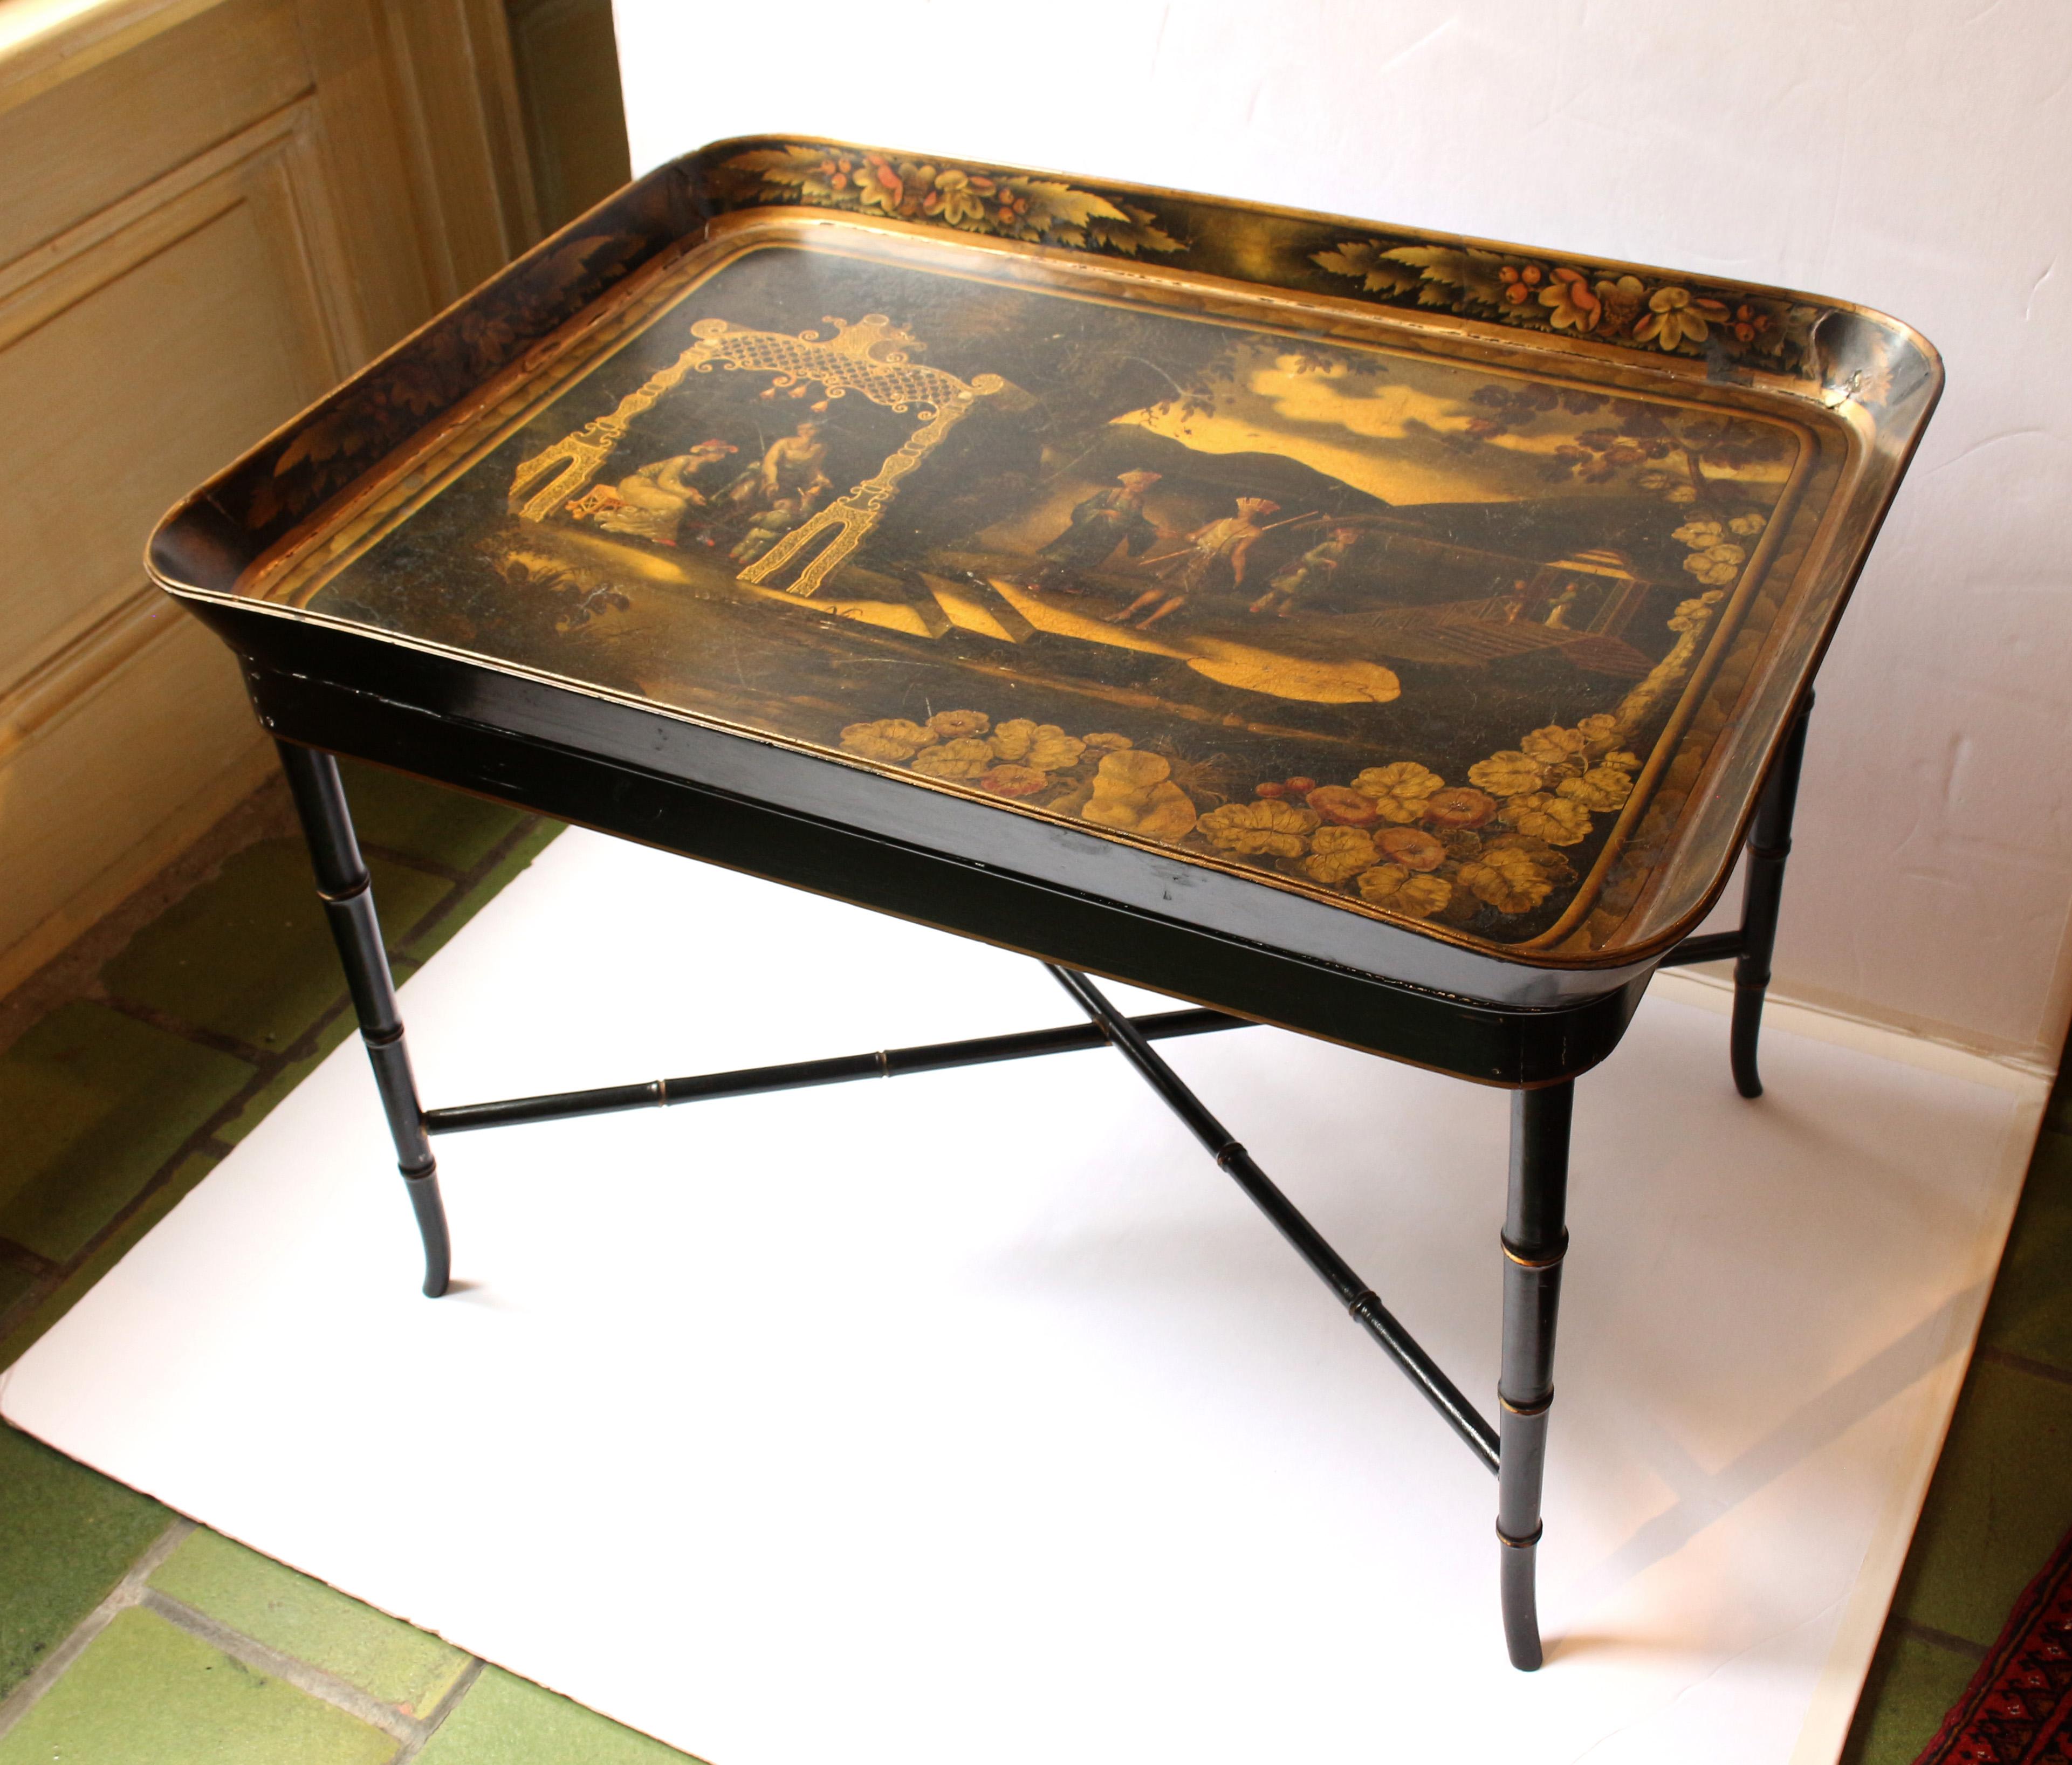 circa 1860s papier mache tray now with custom made coffee table stand, English. The tray with Asian influence scene of people at a lakeside pagoda with soft hills in the background and lush foliage in the fore. Gilt & green overtones. Typical corner